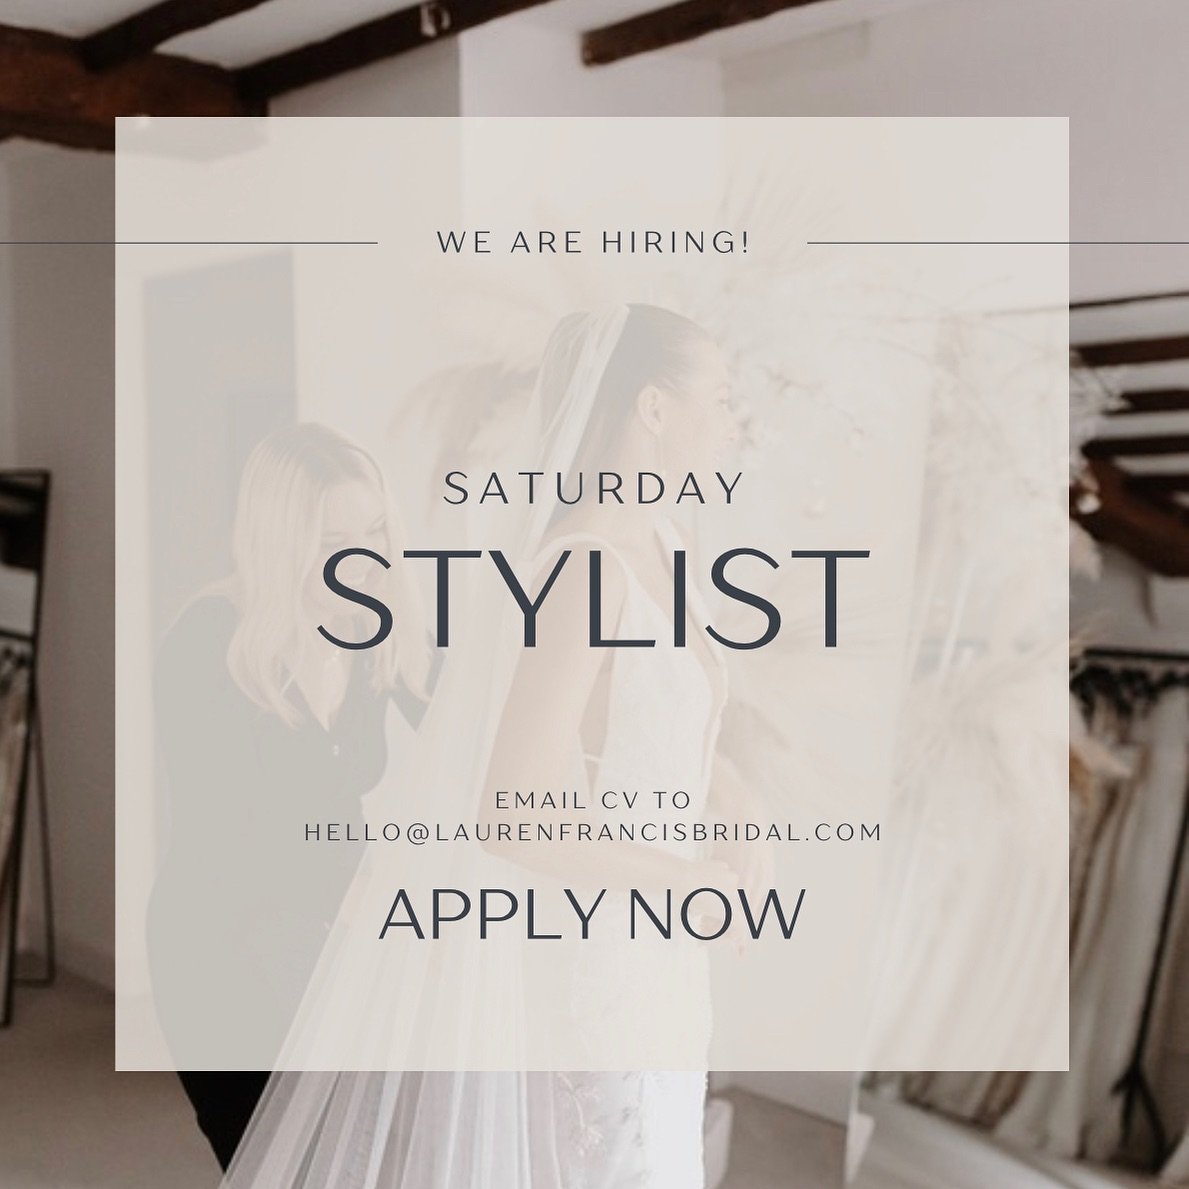 ✨ WE ARE HIRING ✨

So excited to announce our incredible team is growing and we are on the look out to add an amazing bridal stylist to our team for our busy Saturday&rsquo;s.

We pride ourselves on offering the BEST service to our brides so we are l